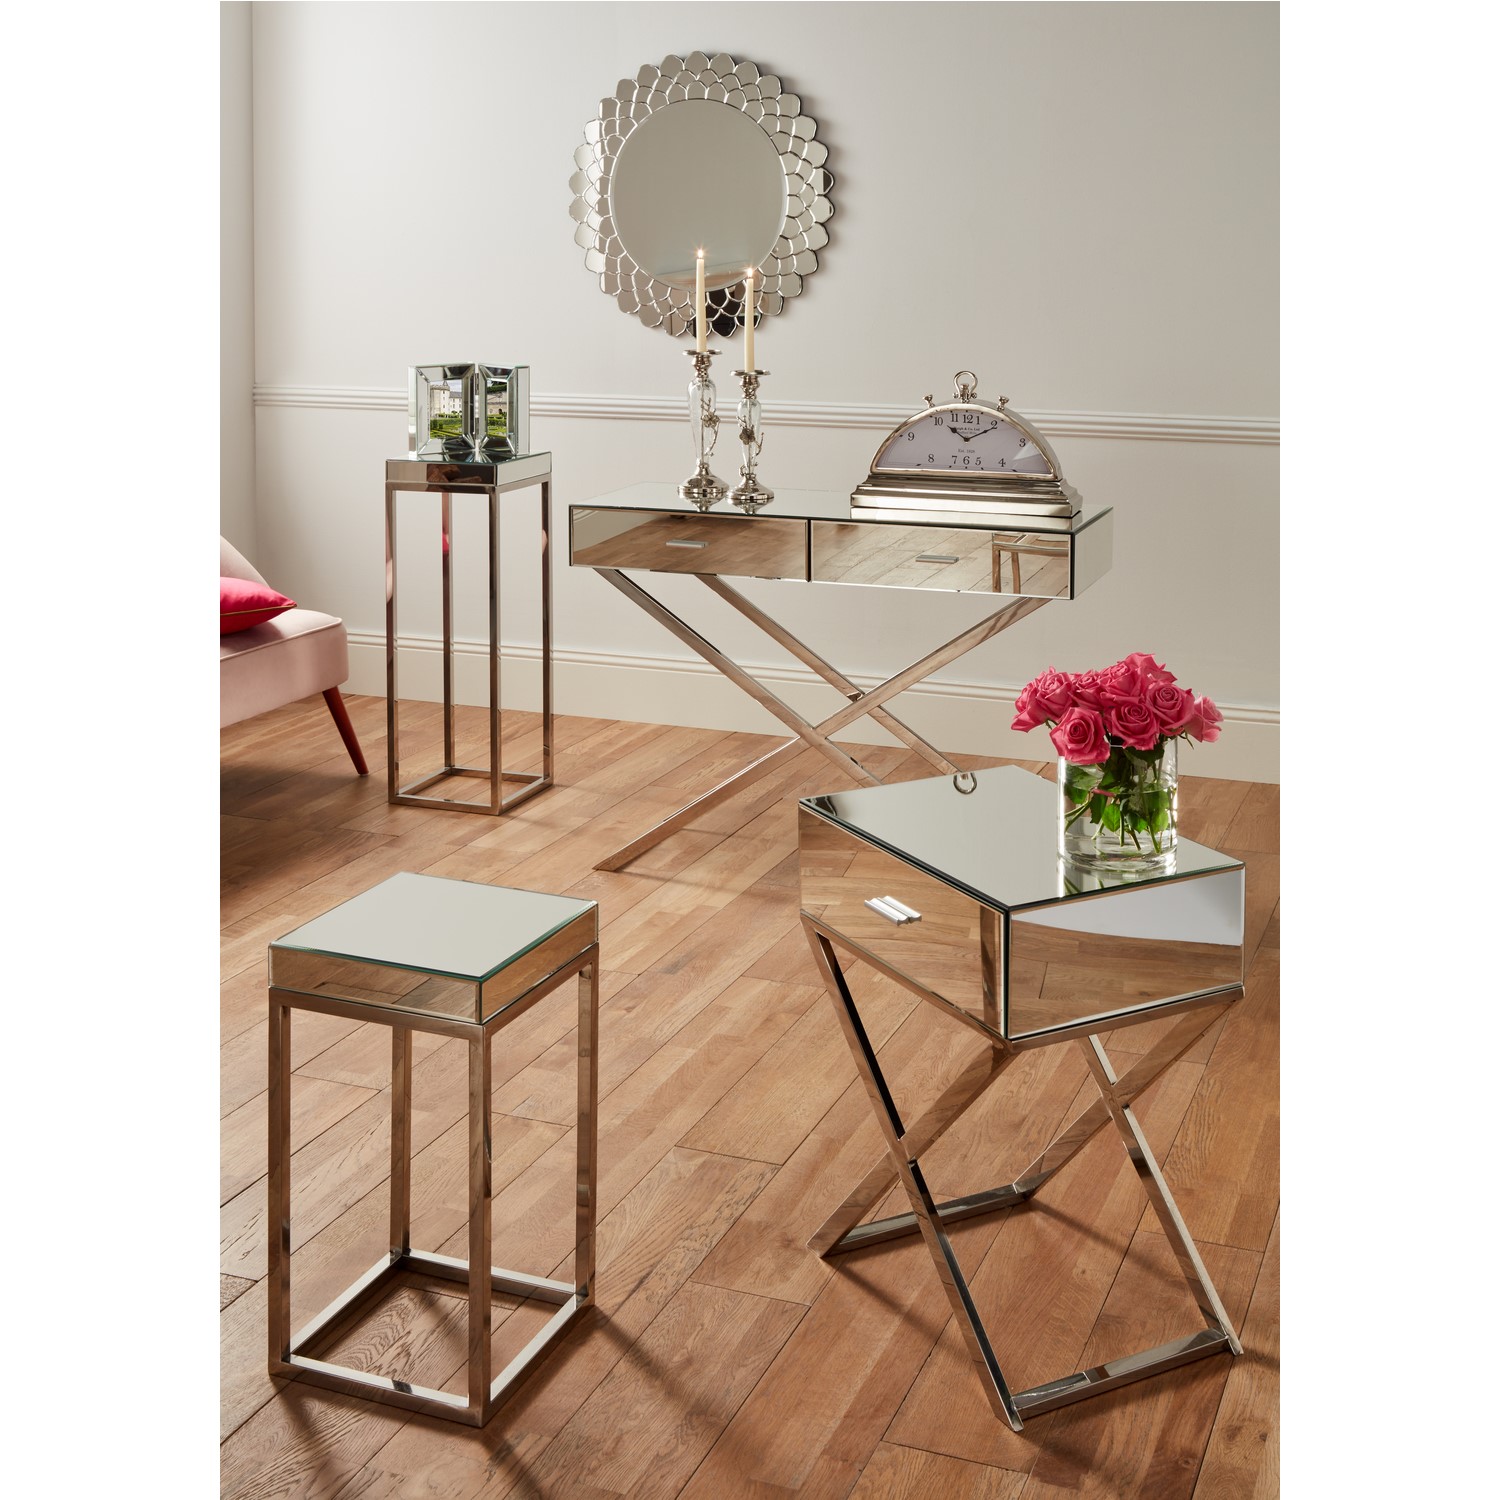 Mirrored Small Side Table In Glass, Very Small Mirrored Side Table